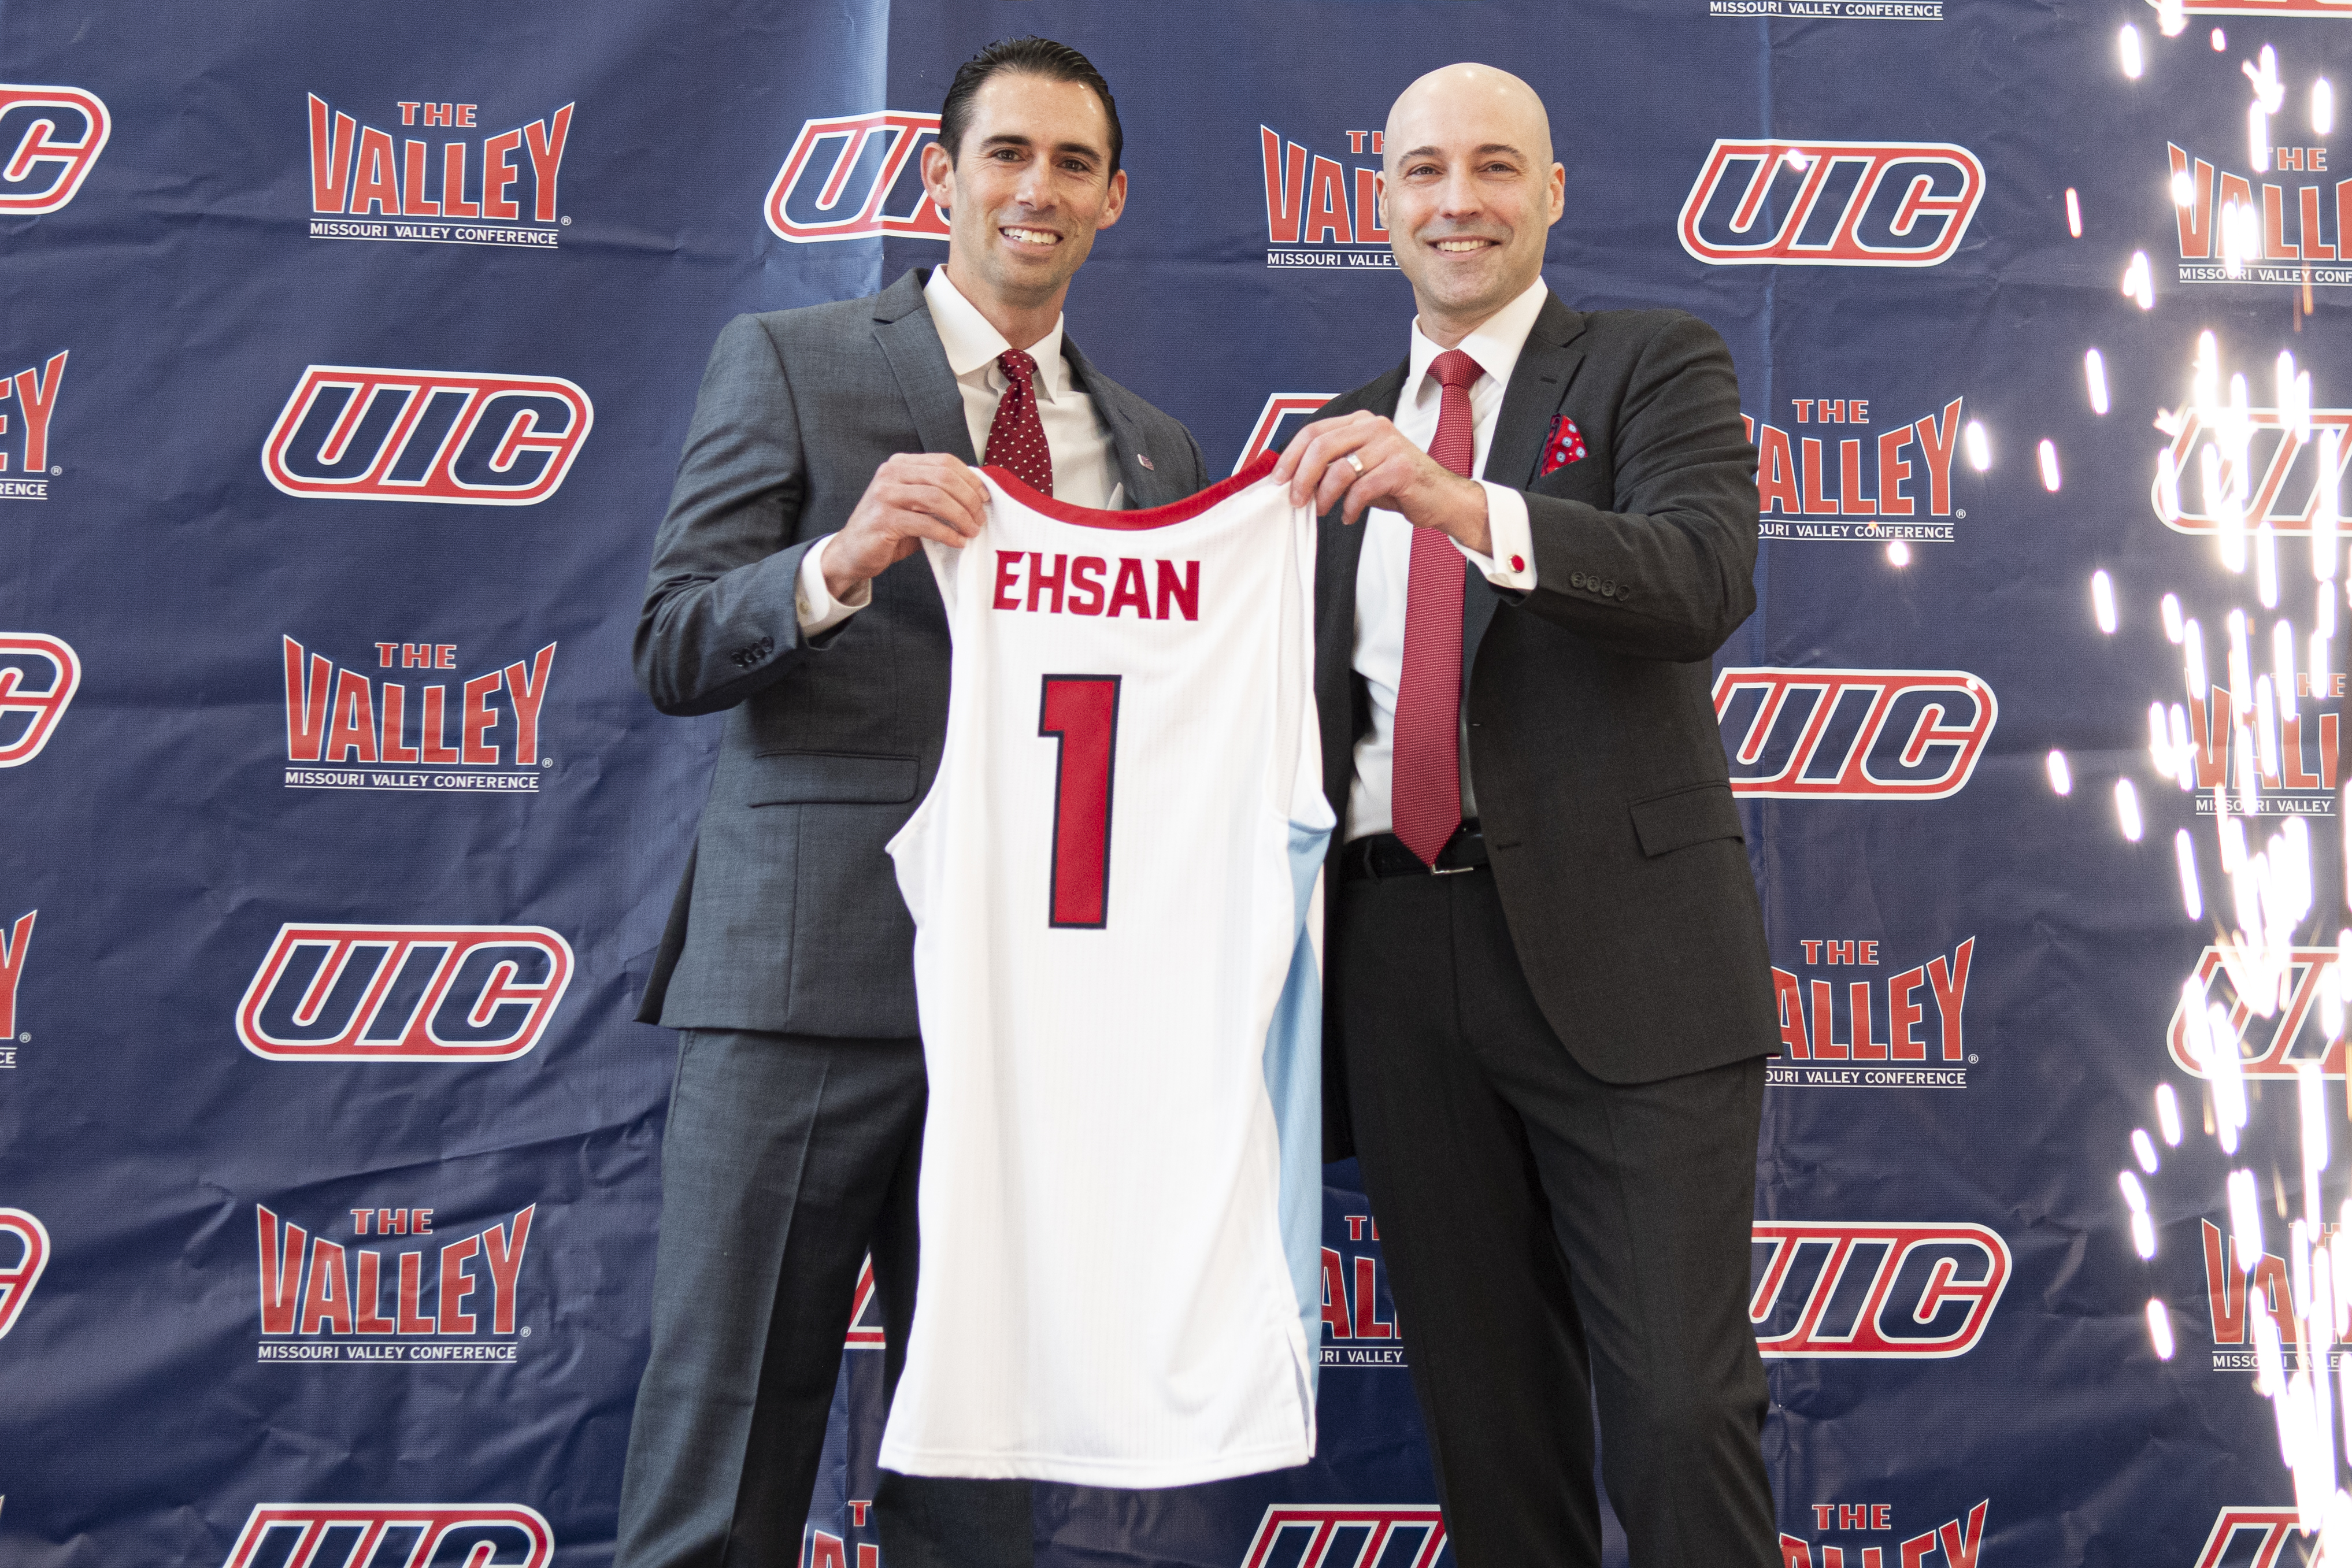 Rob Ehsan, left, and UIC Director of Athletics Michael Lipitz hold up a jersey at the April 1 press conference announcing Ehsan's appointment as the new head coach for UIC men's basketball. (Phil Bergman)